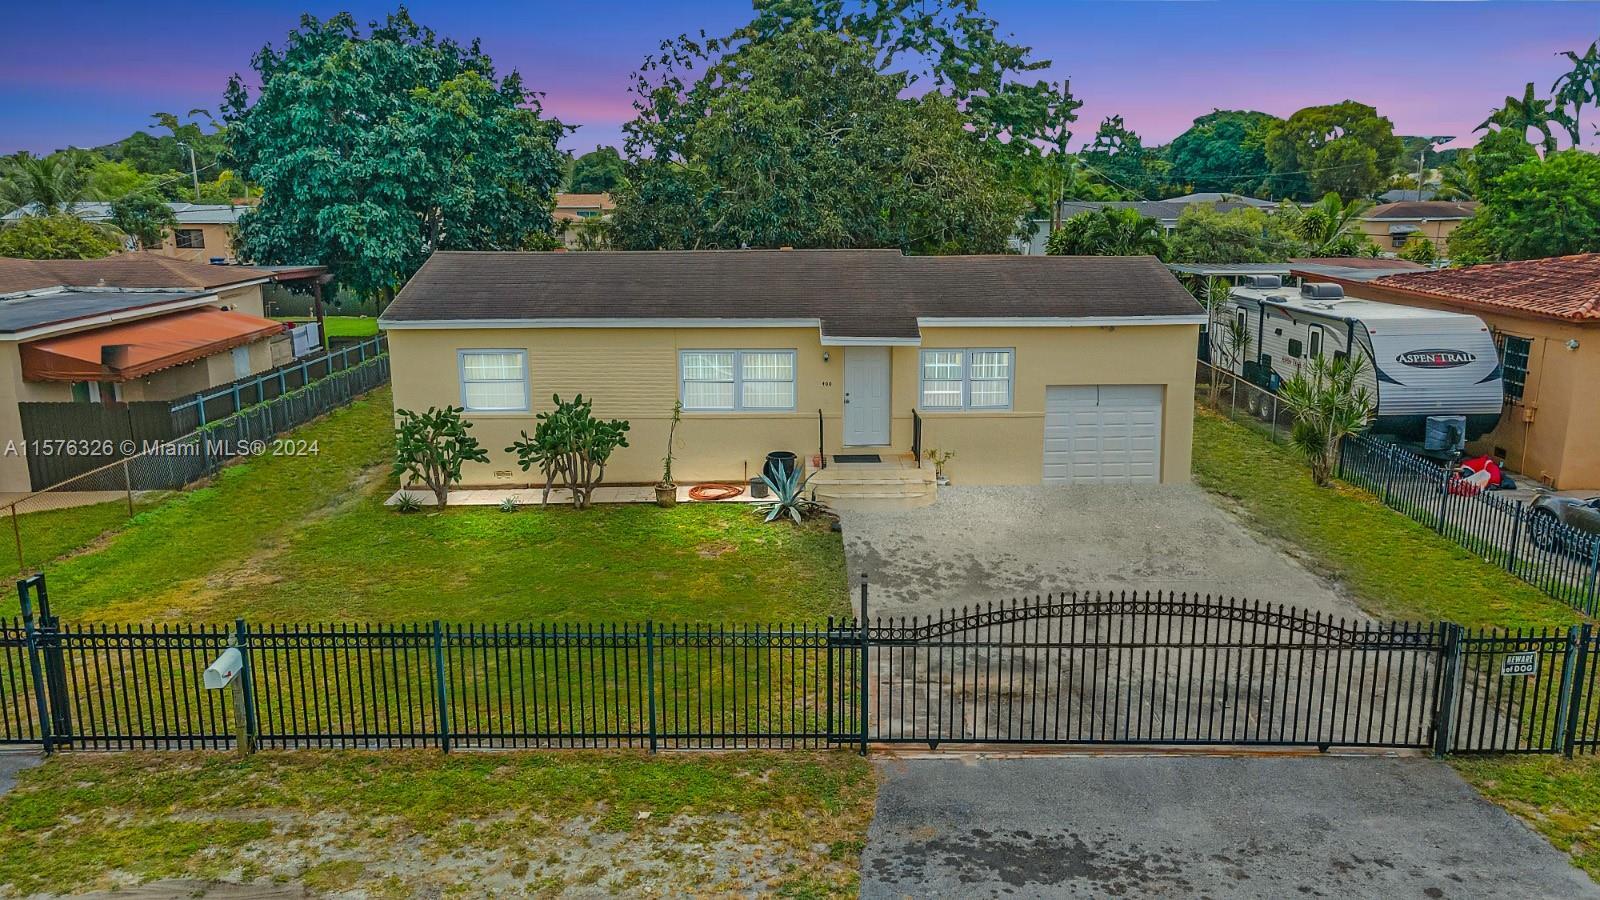 Photo of 400 NW 150th St in Miami, FL